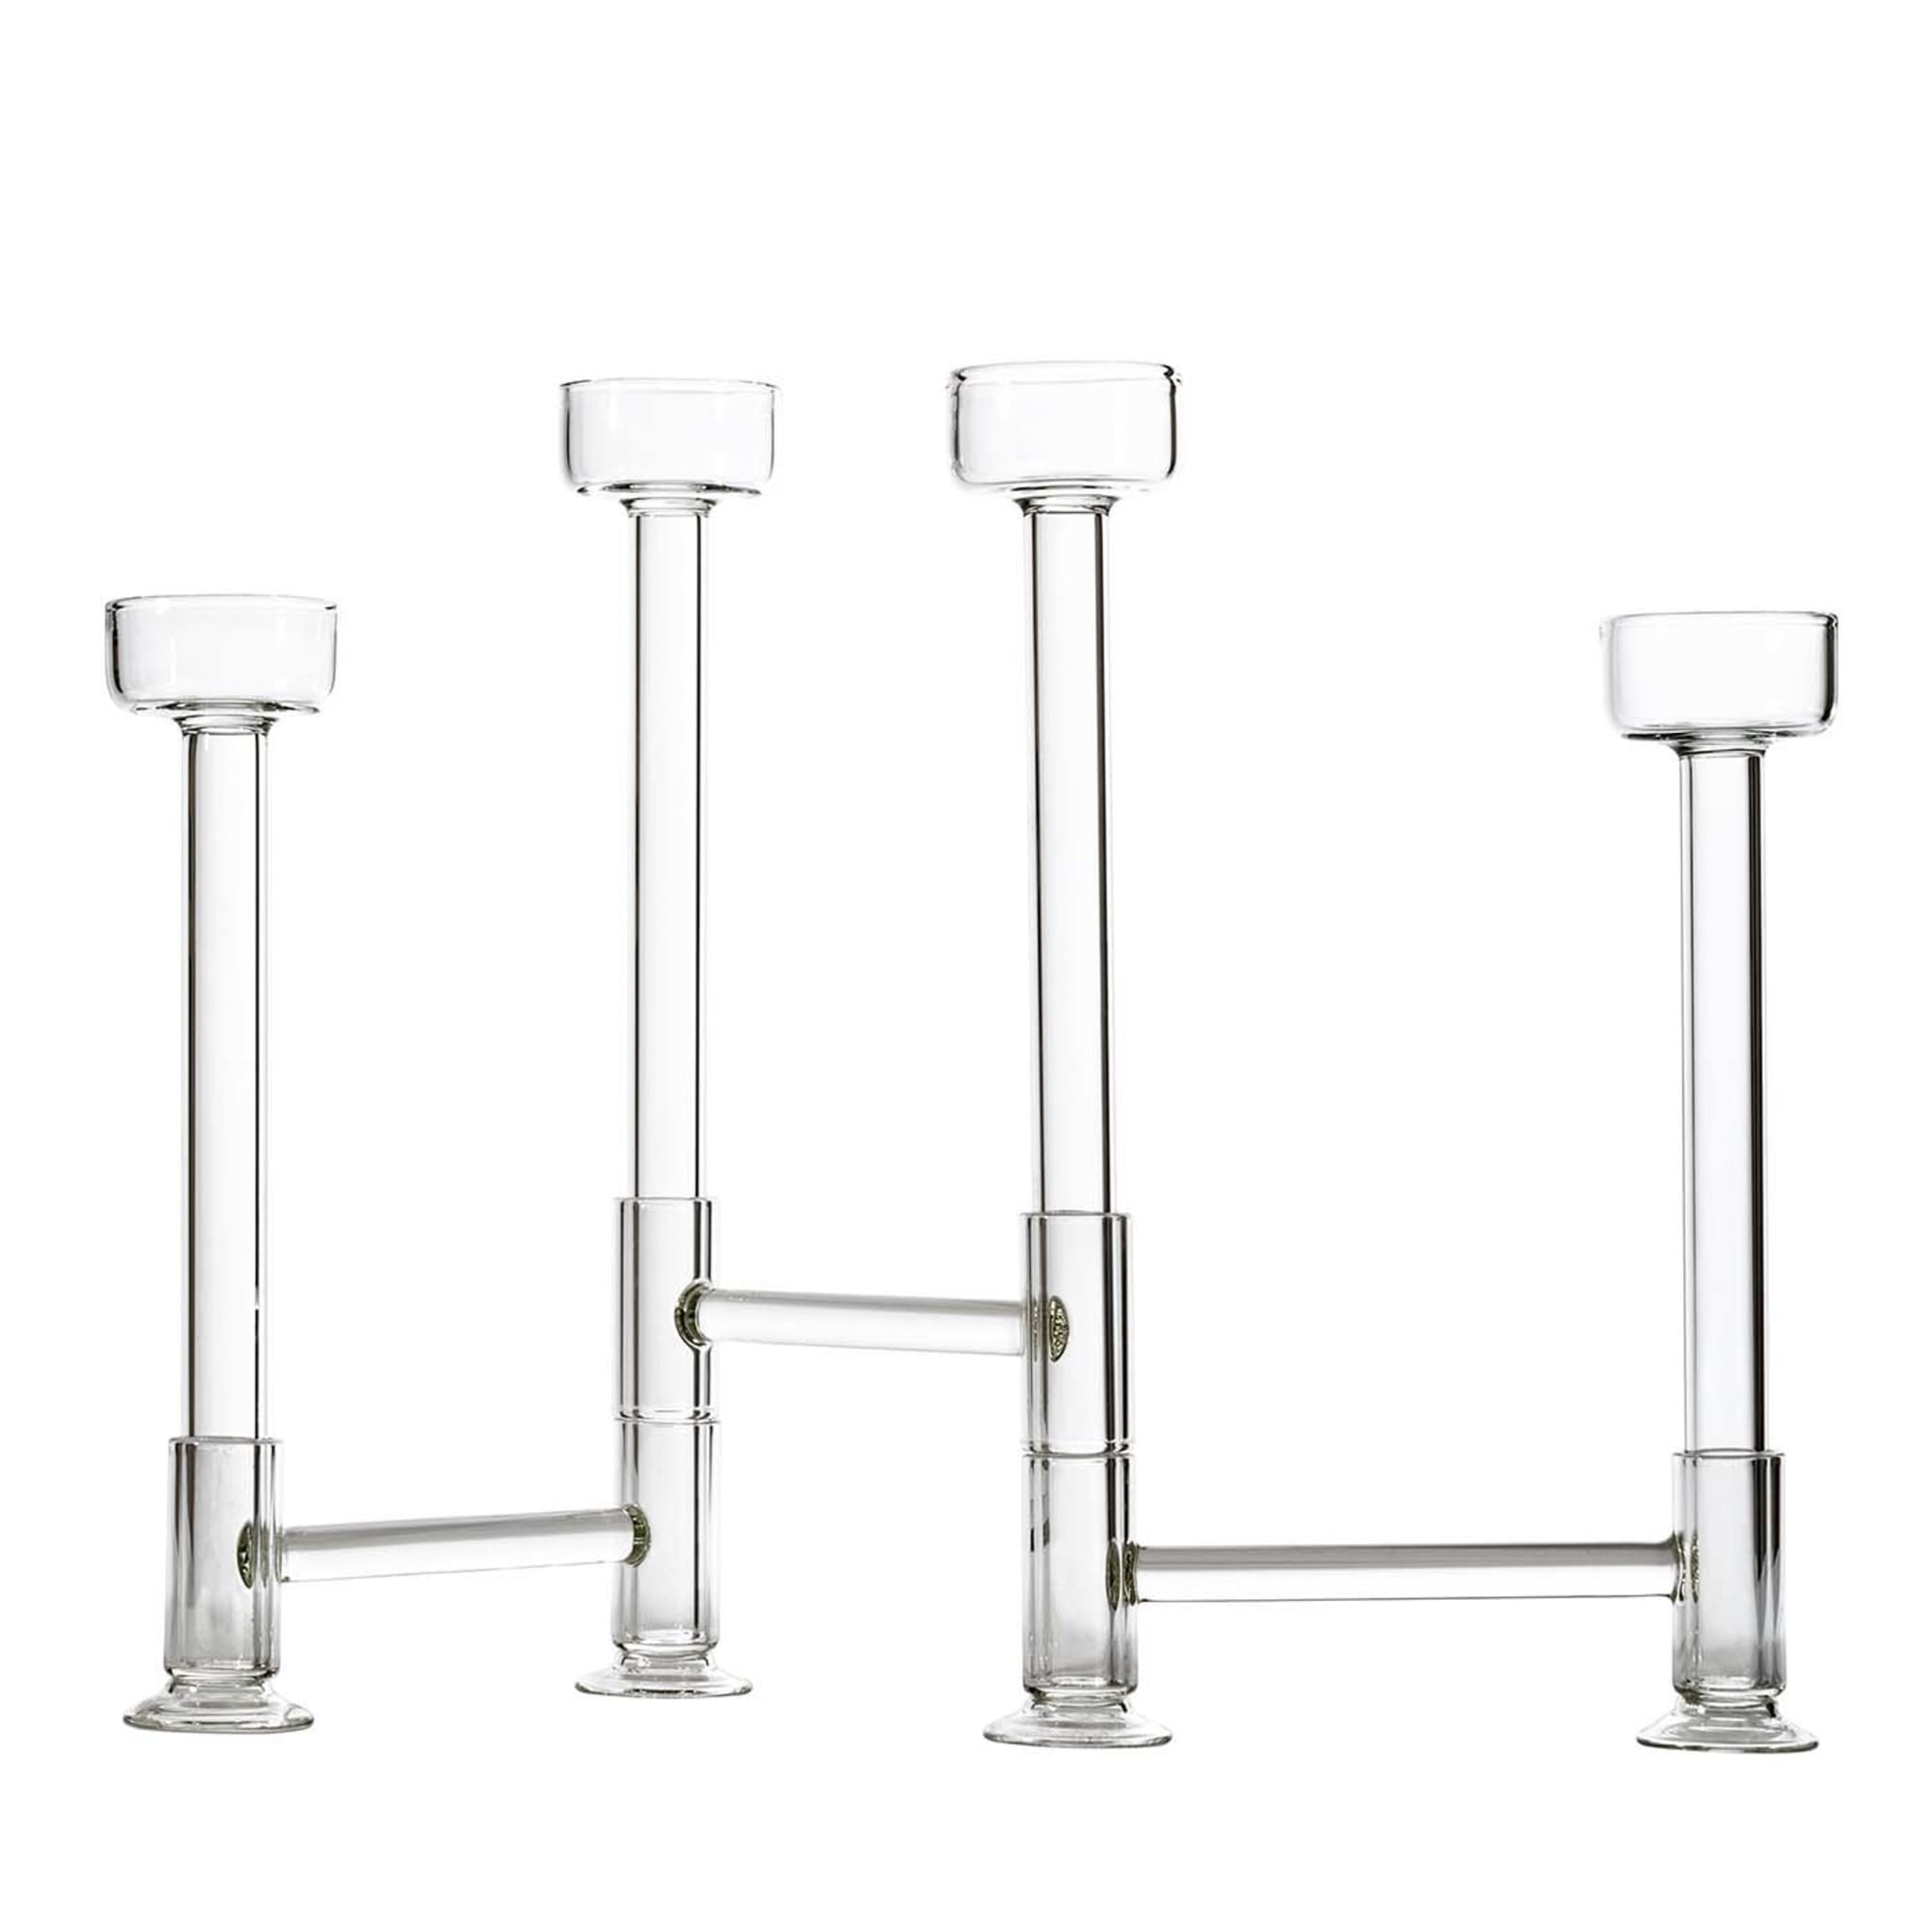 Eolo 4 Candle Holder - Main view